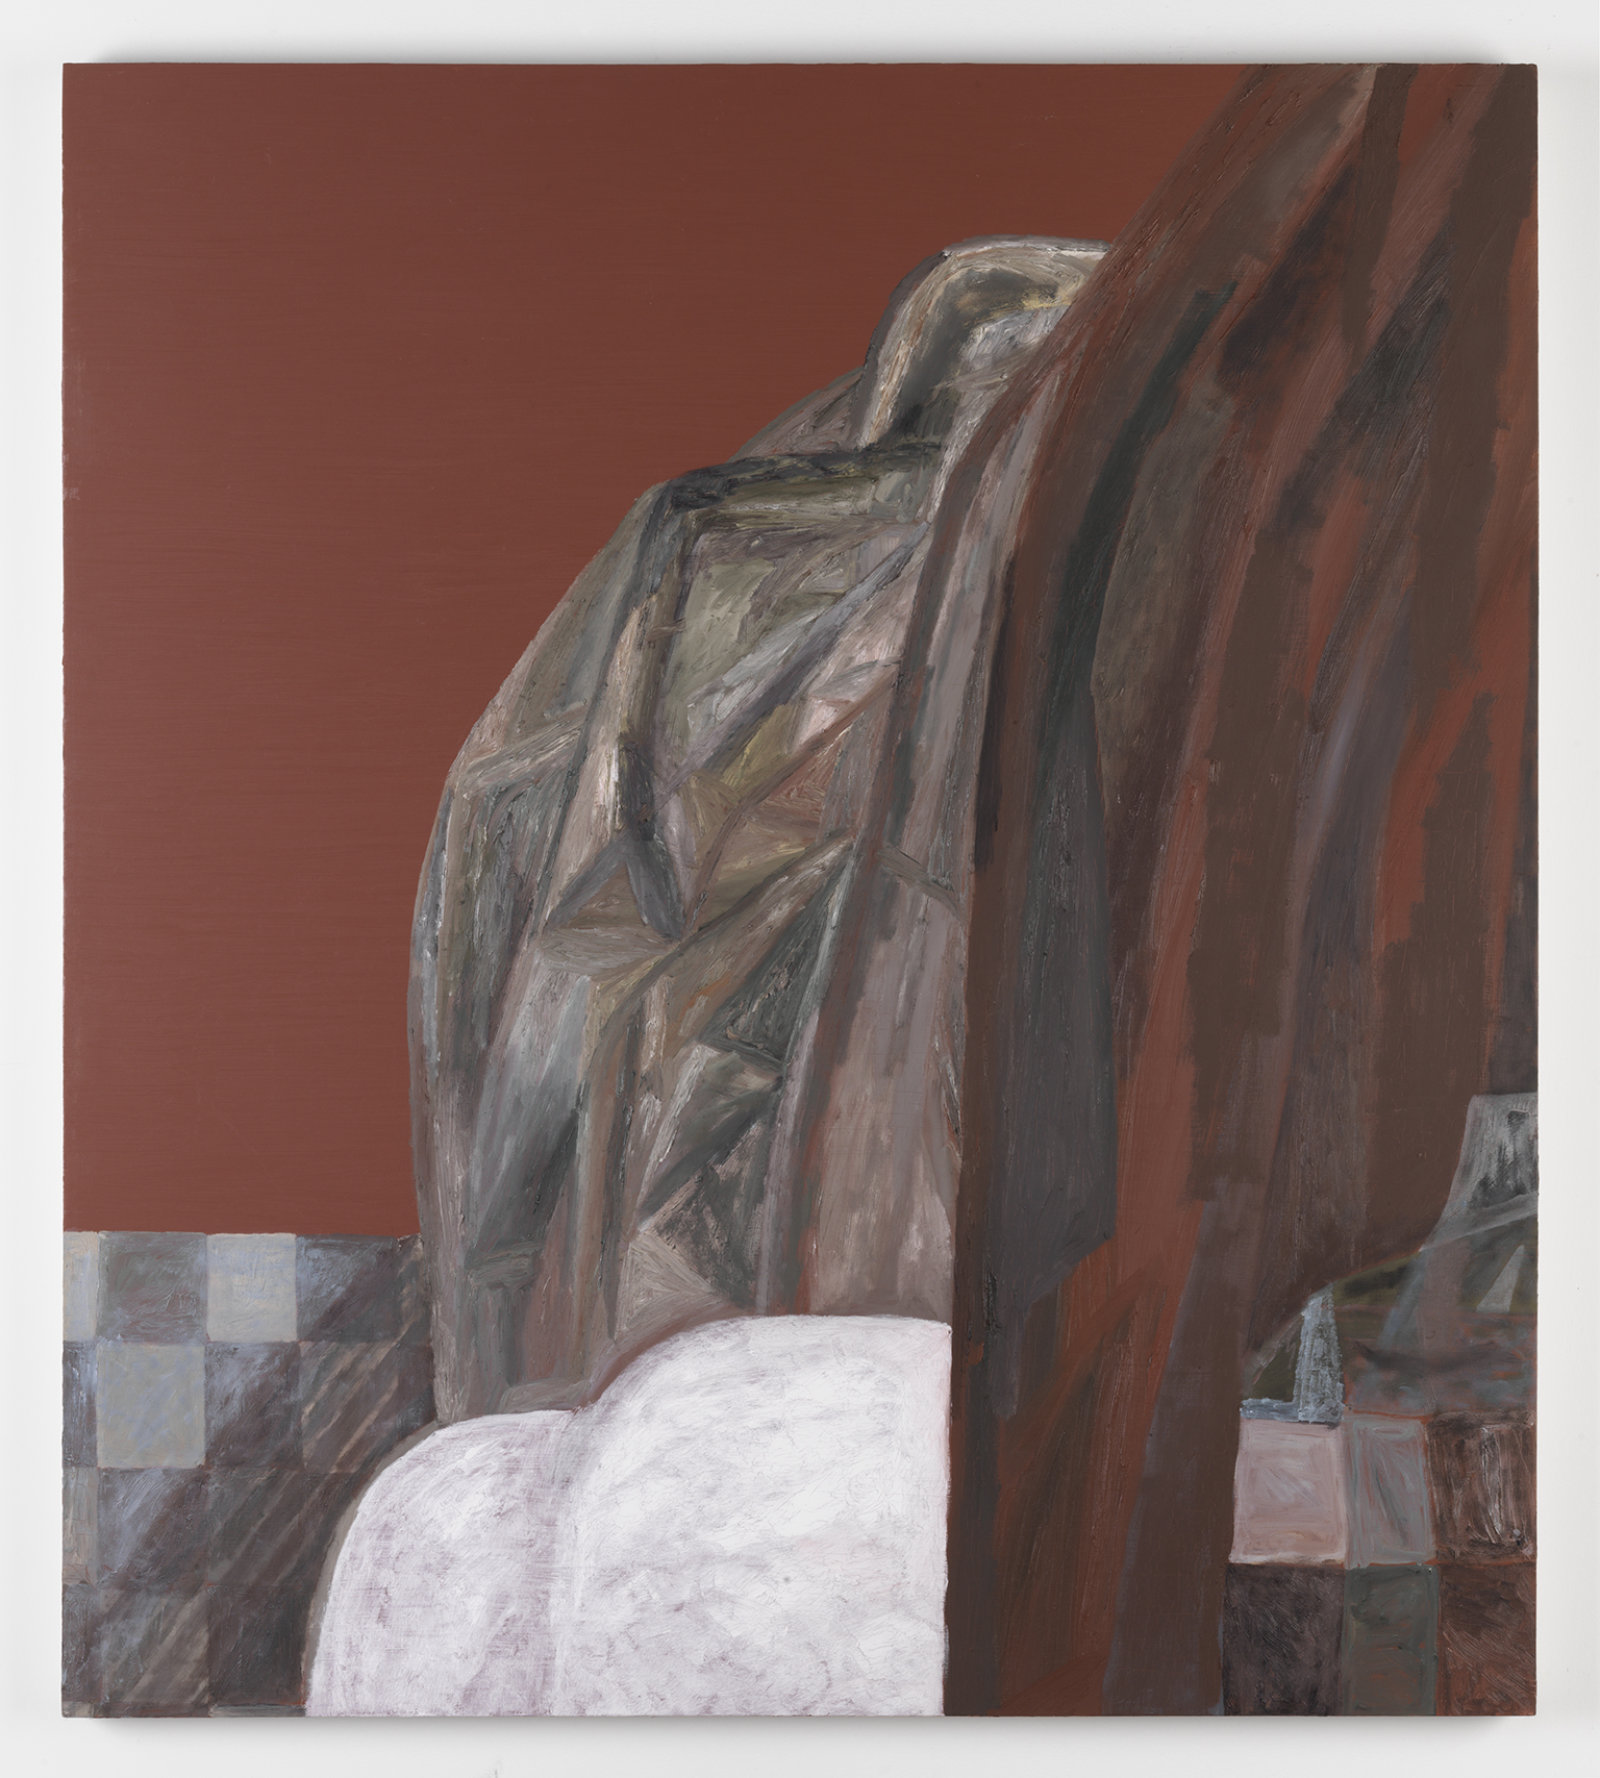 Rebecca Brewer, Curtain, 2011-2012, oil on panel, 47 x 42 in. (120 x 107 cm)